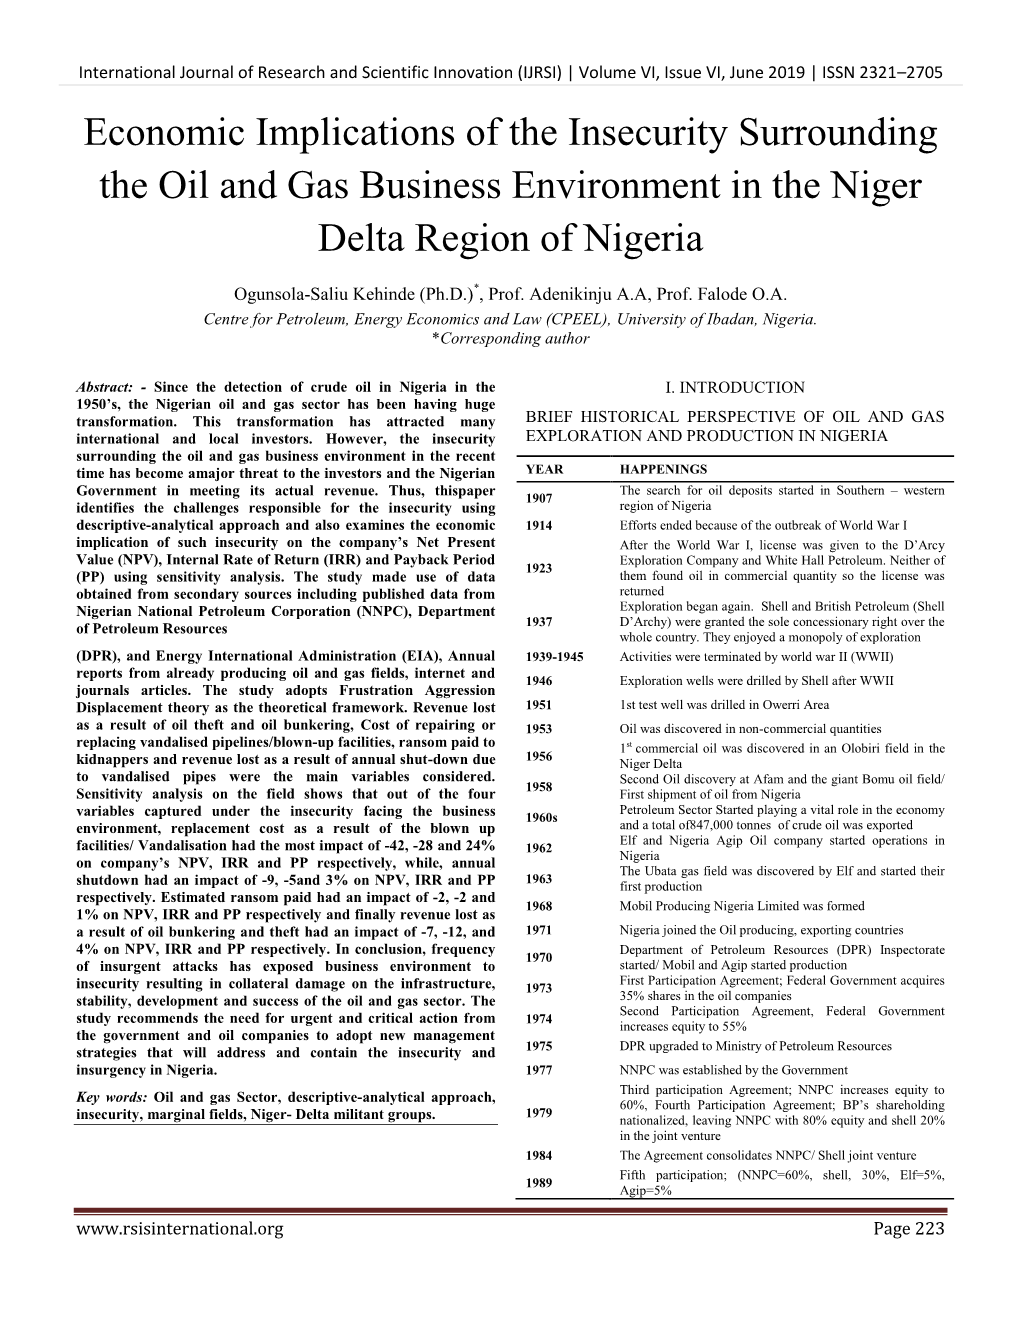 Economic Implications of the Insecurity Surrounding the Oil and Gas Business Environment in the Niger Delta Region of Nigeria